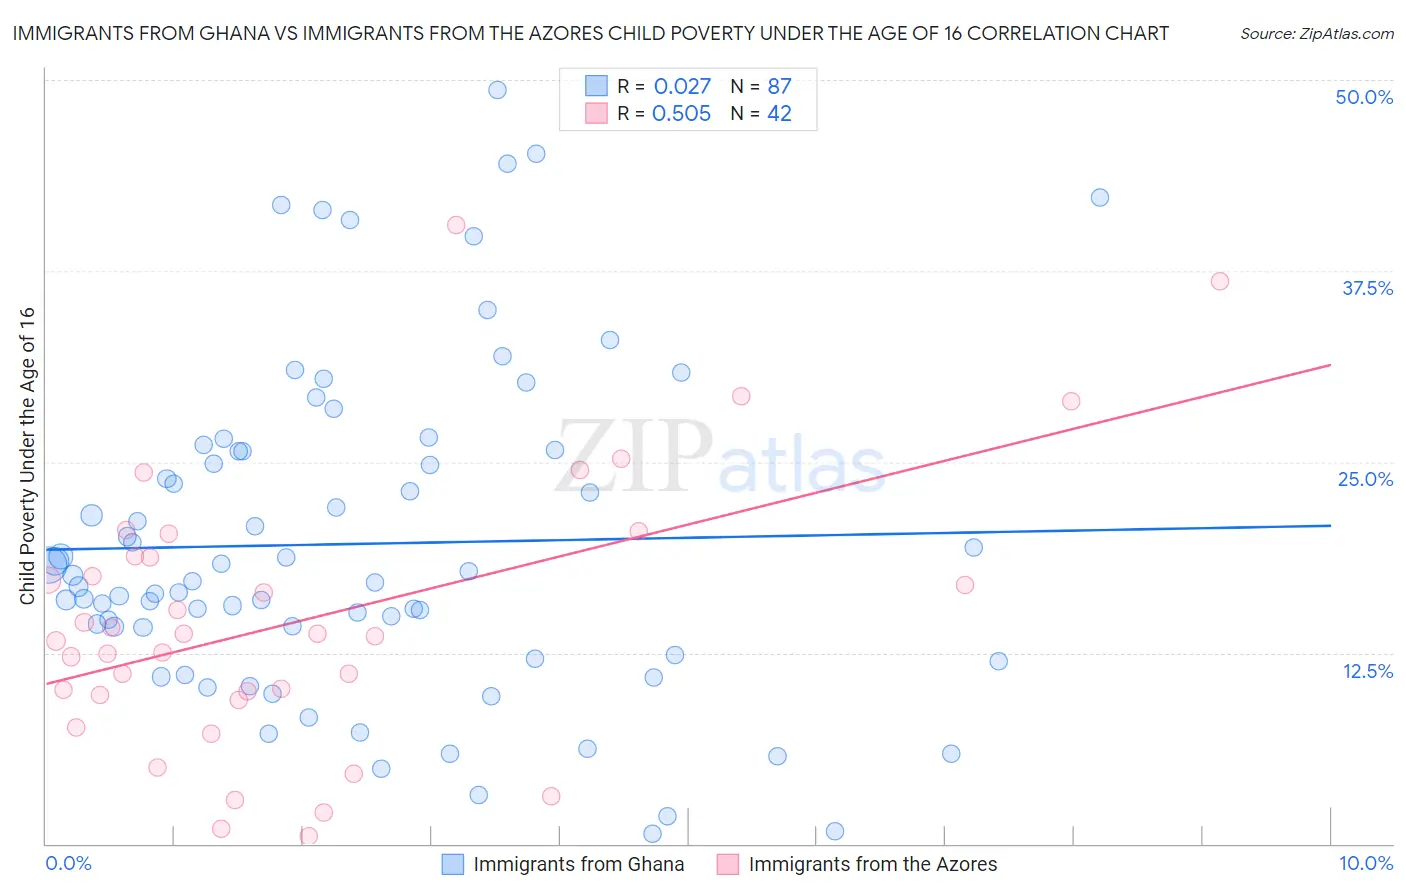 Immigrants from Ghana vs Immigrants from the Azores Child Poverty Under the Age of 16